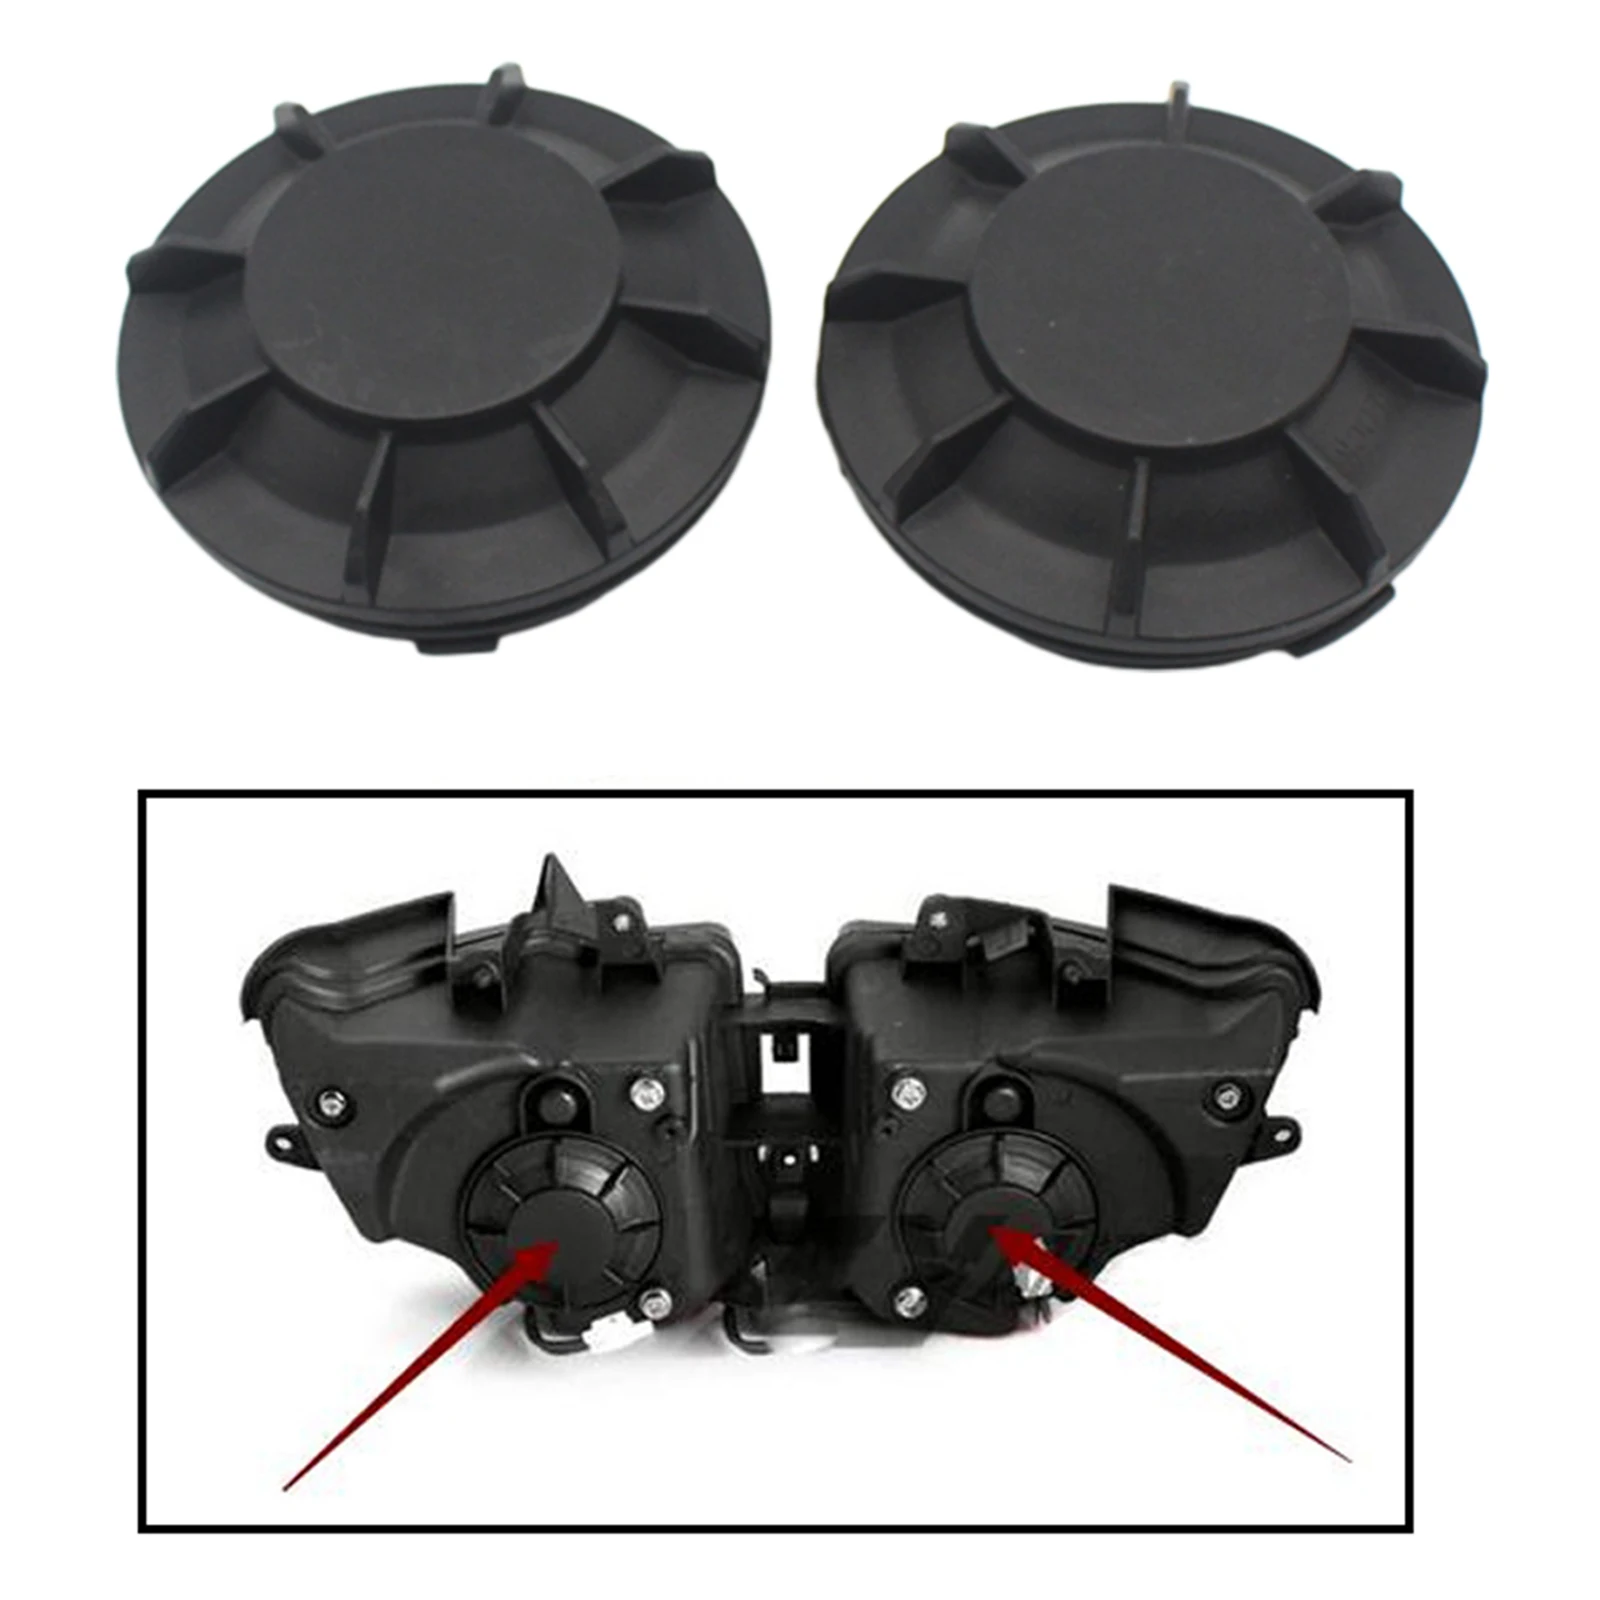 Headlight Tail Rear Cap Scooter Part Cover Dustproof For Yamaha YZF R6 R1 - $20.62